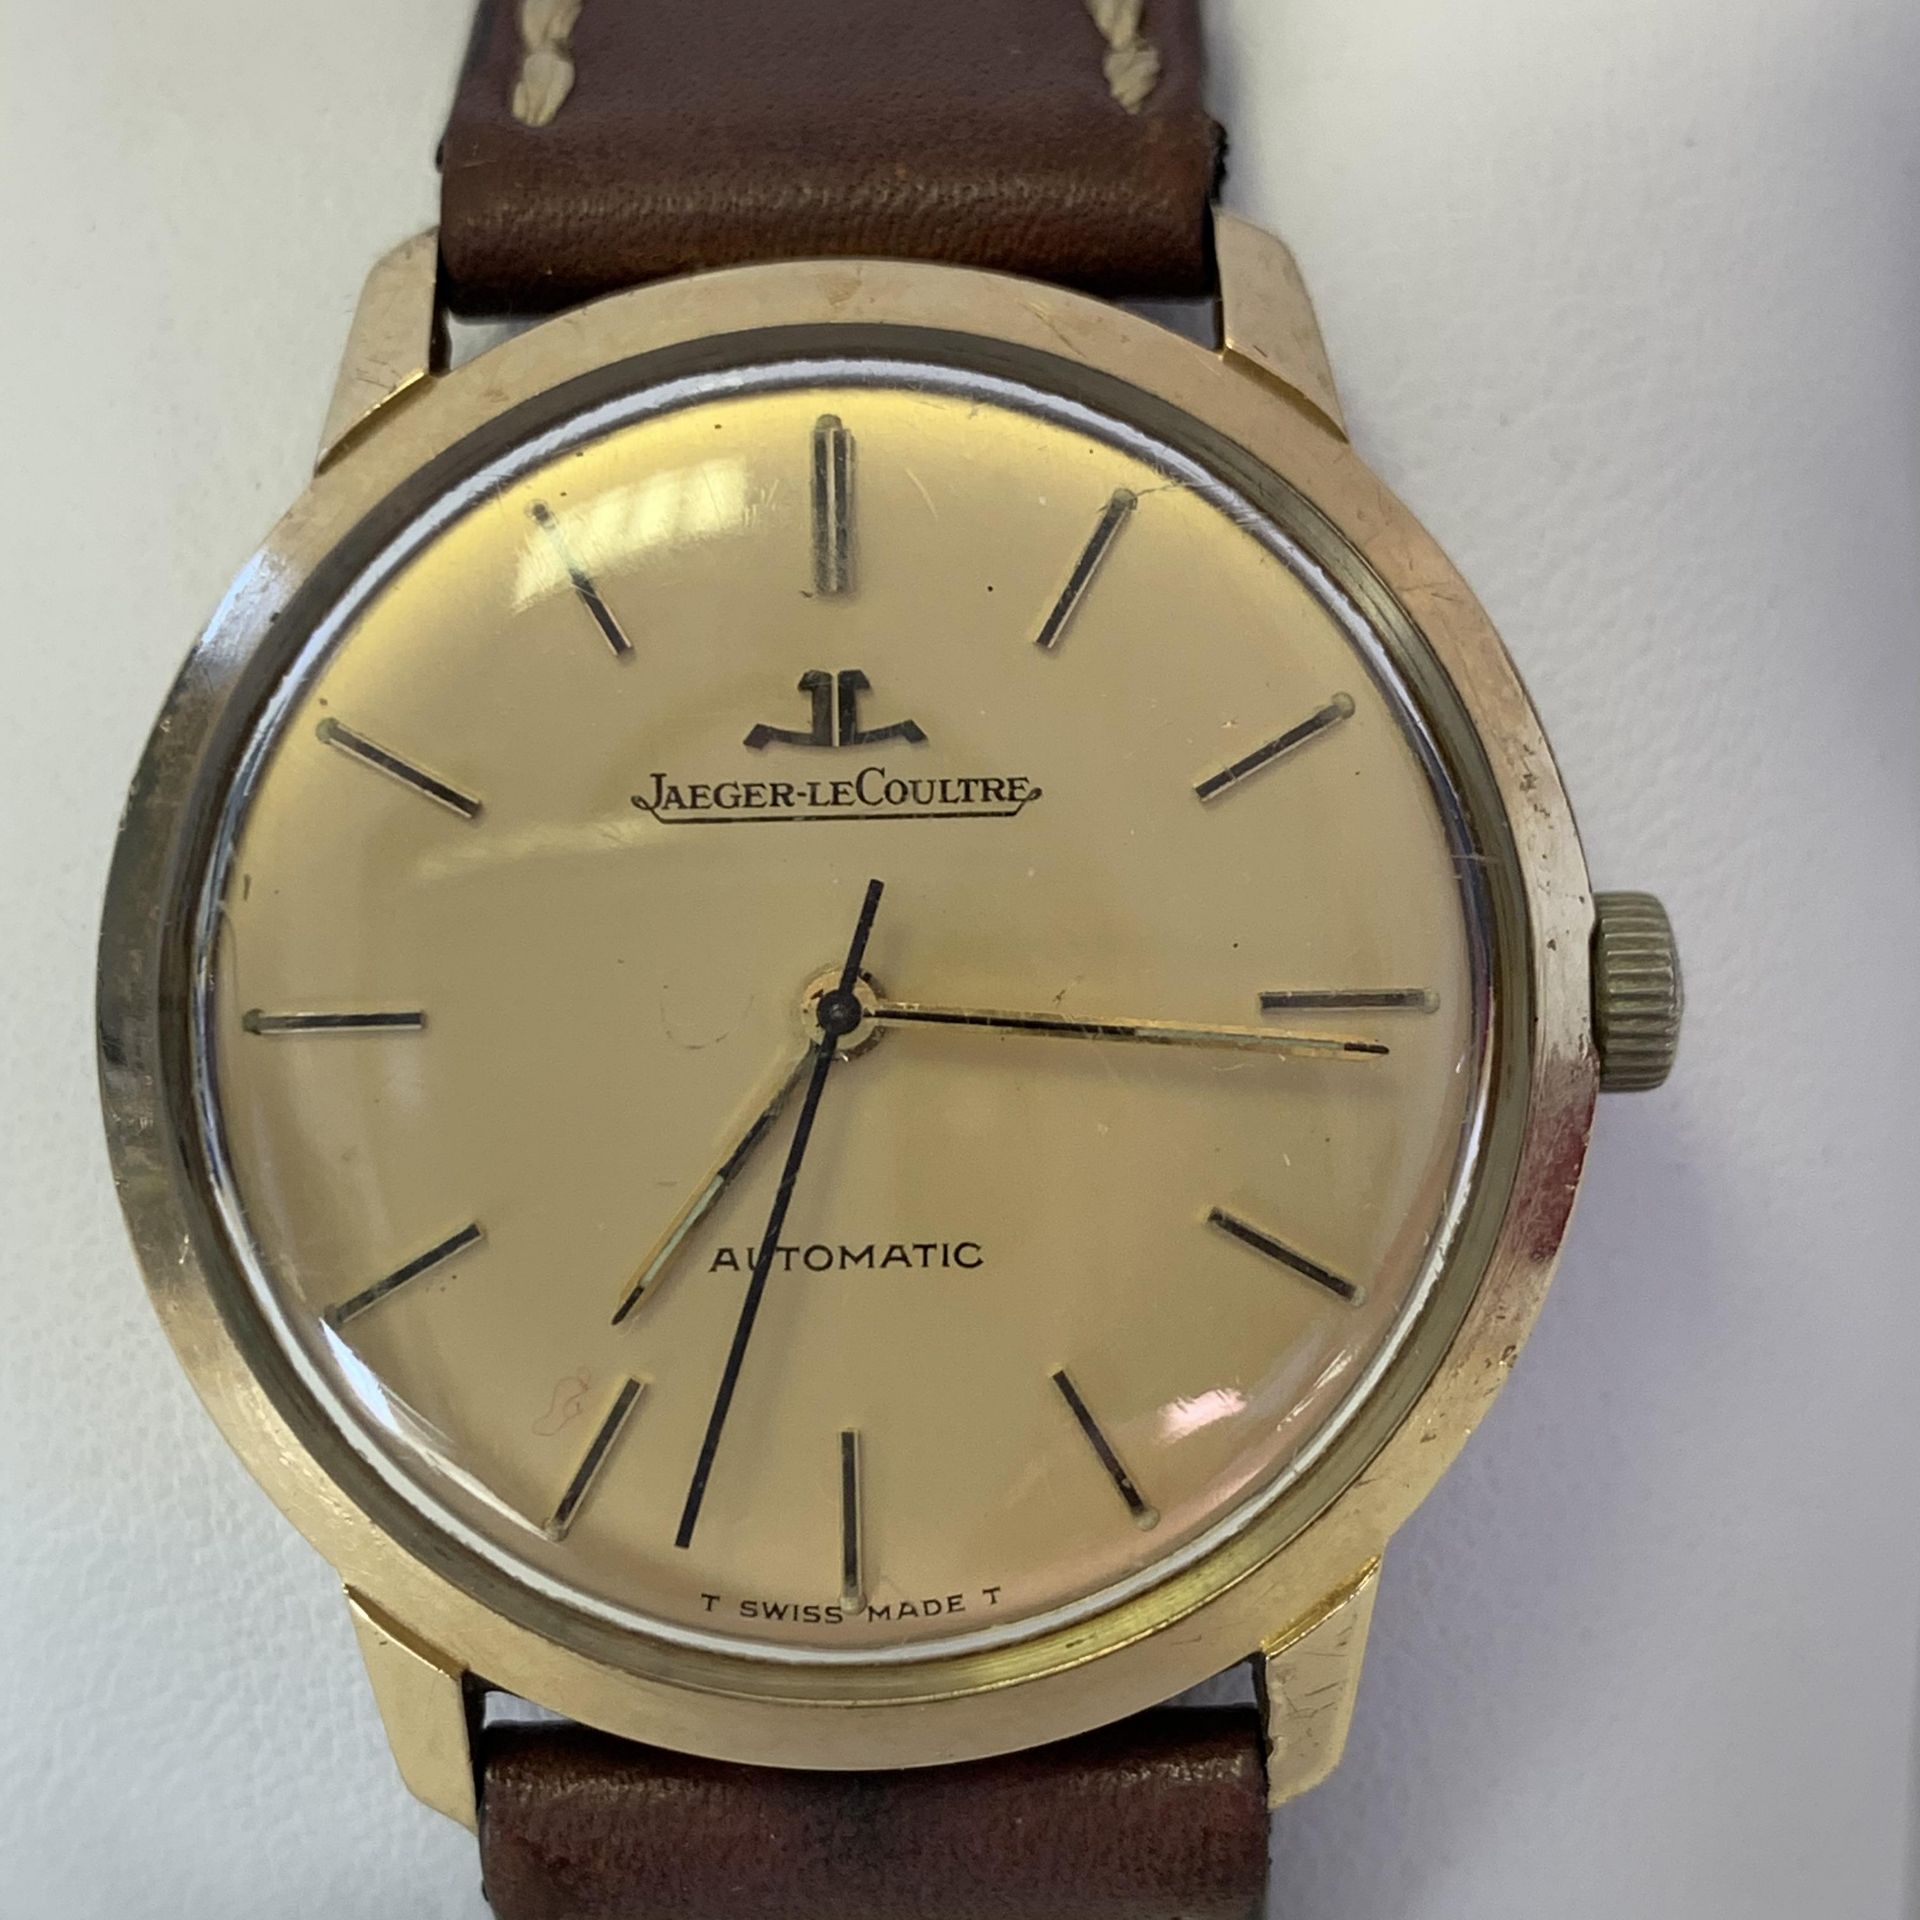 Gentleman's Jaeger Le Couture wrist watch in 9ct gold case, approximately 12.